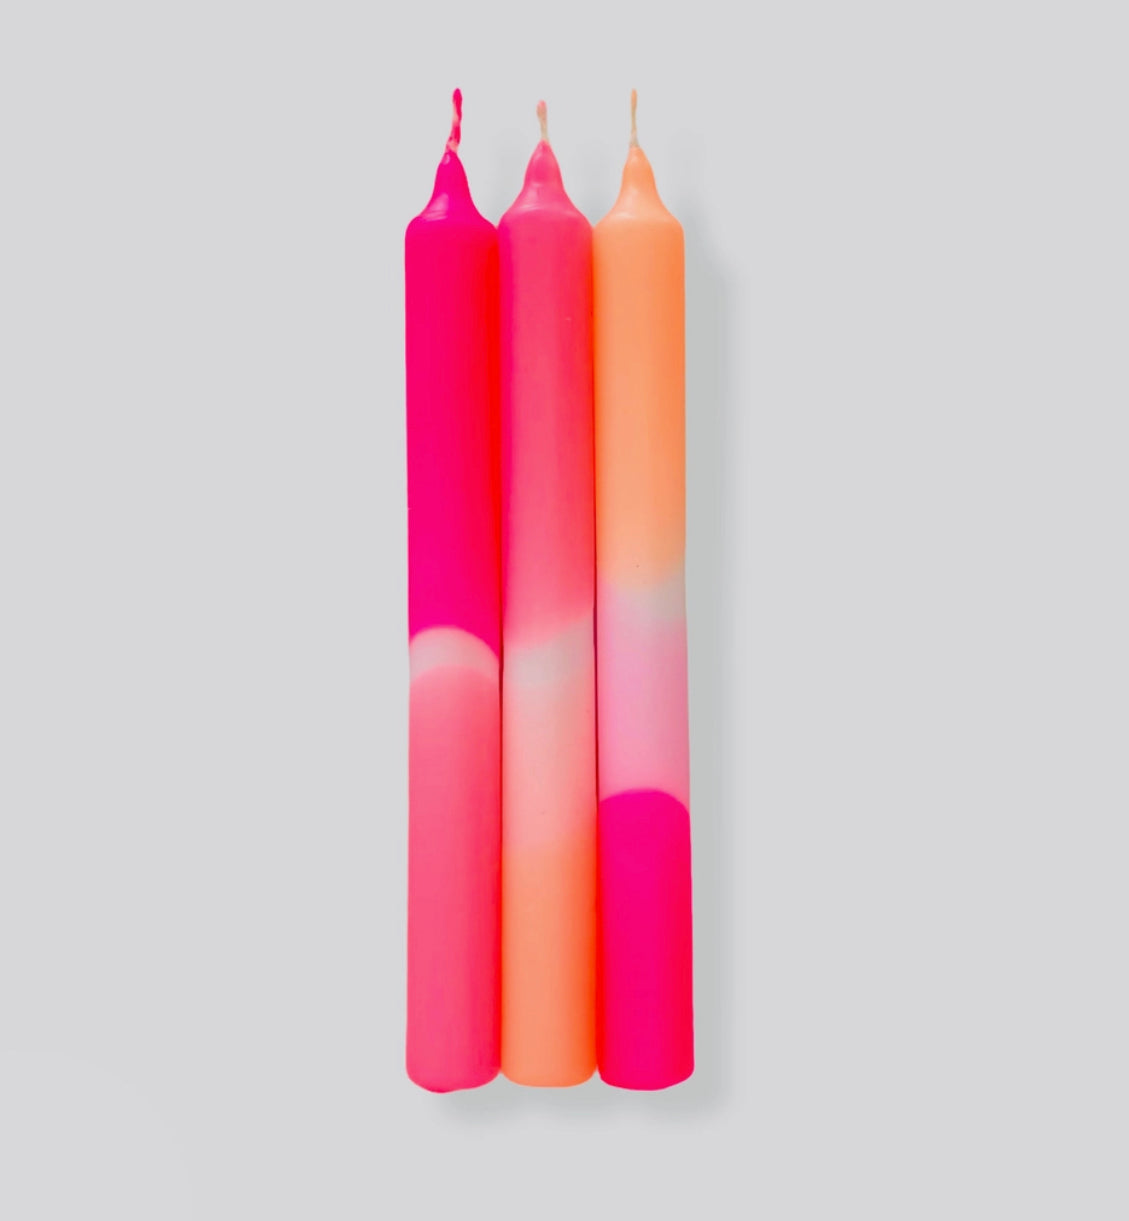 Neon dipped candles